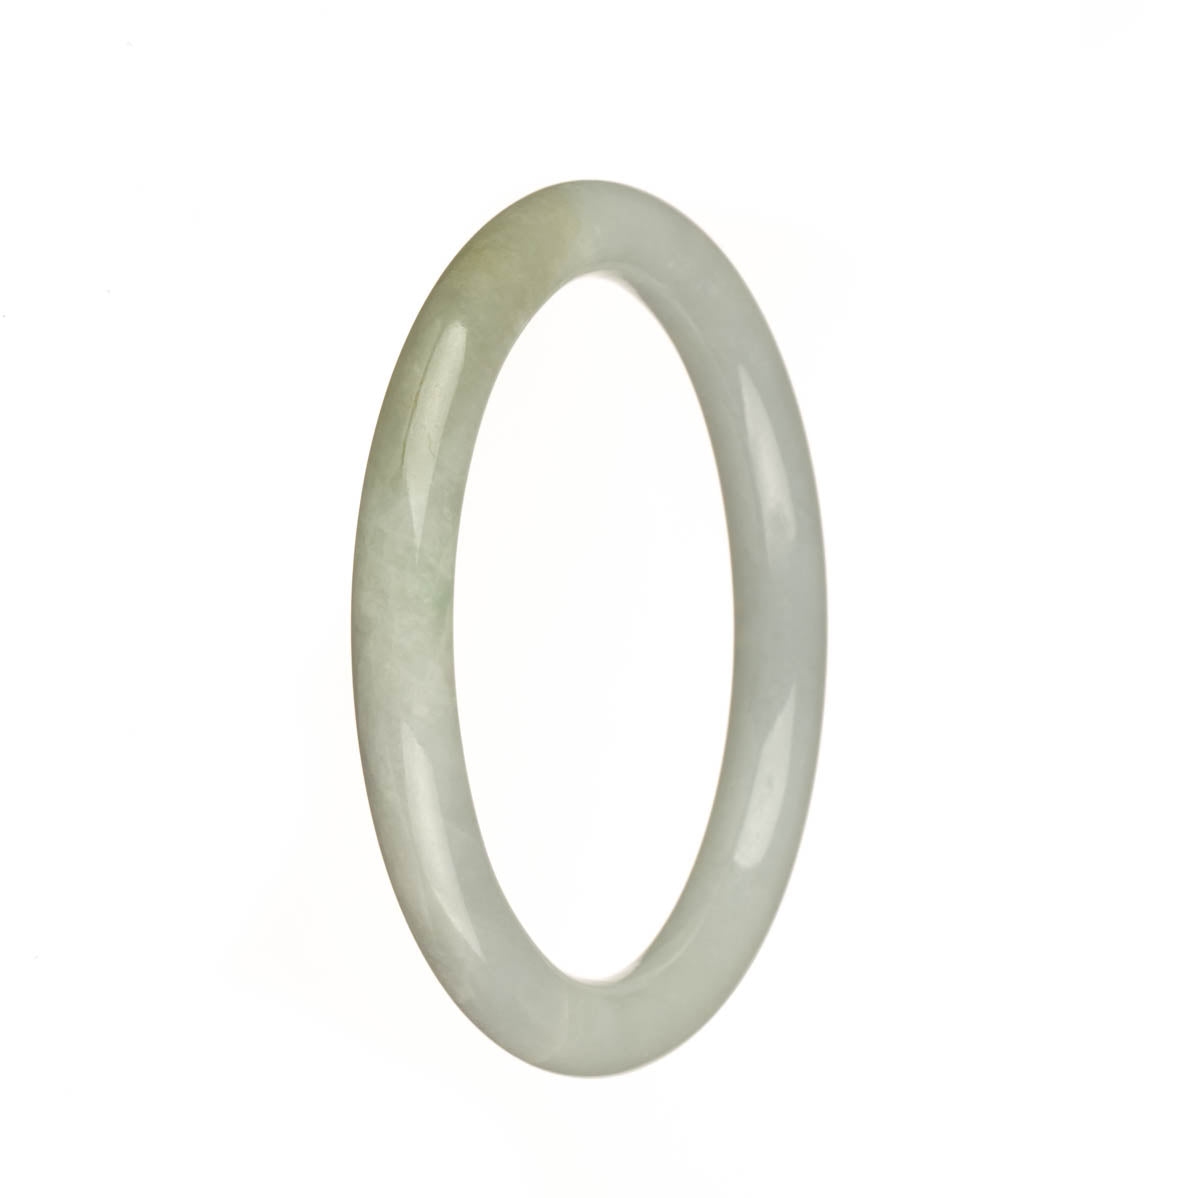 Certified Untreated White Traditional Jade Bangle - 56mm Petite Round